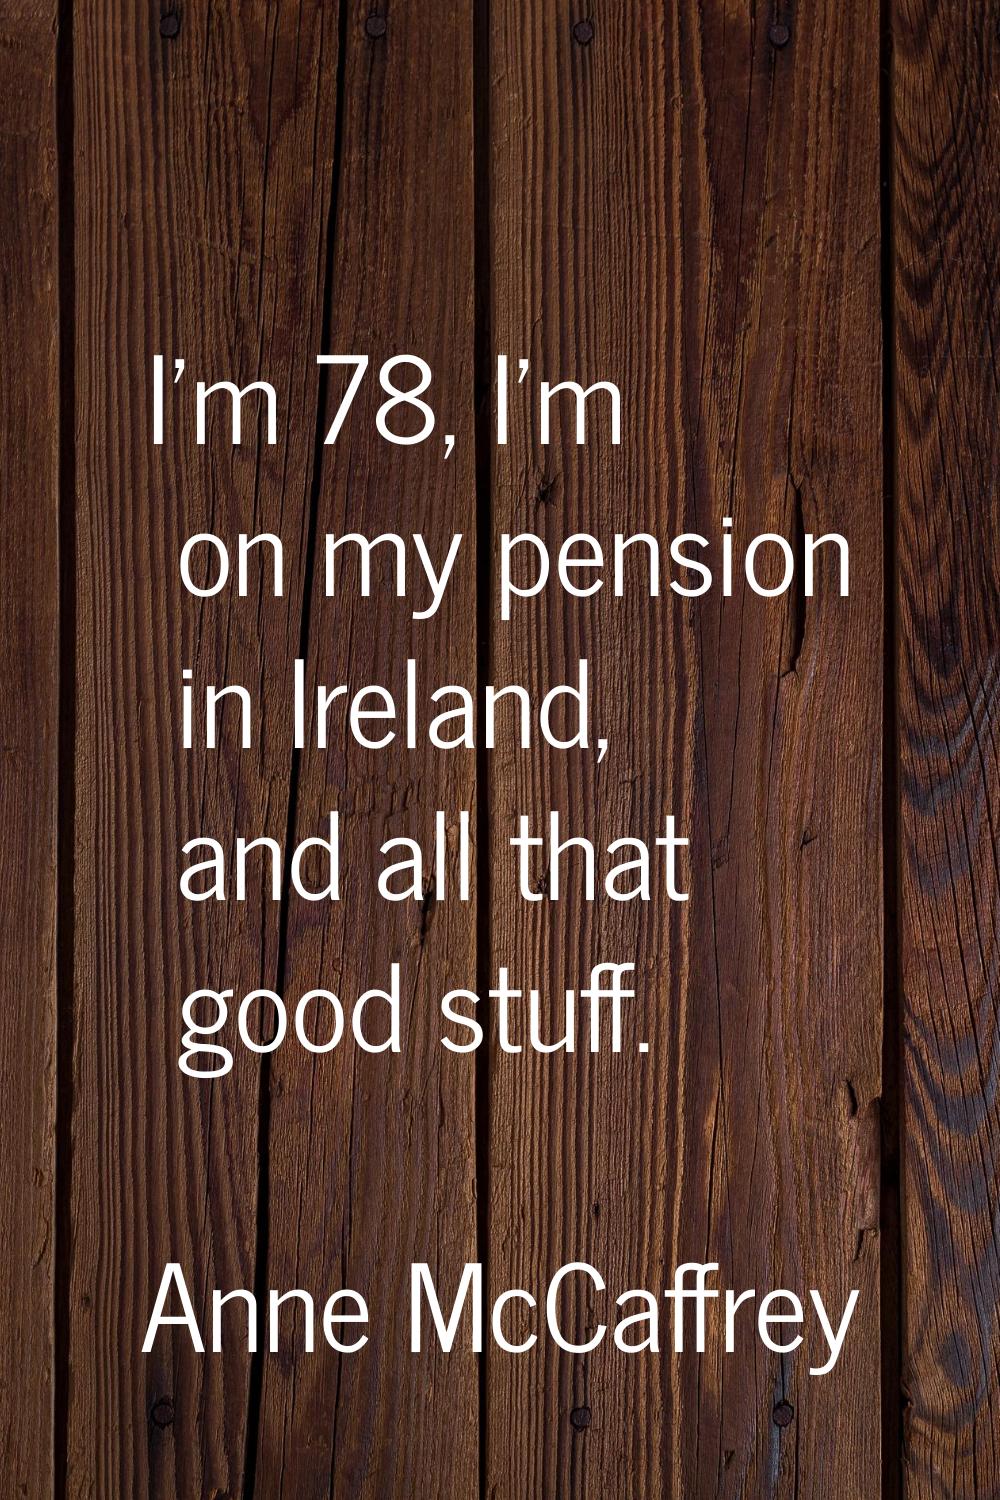 I'm 78, I'm on my pension in Ireland, and all that good stuff.